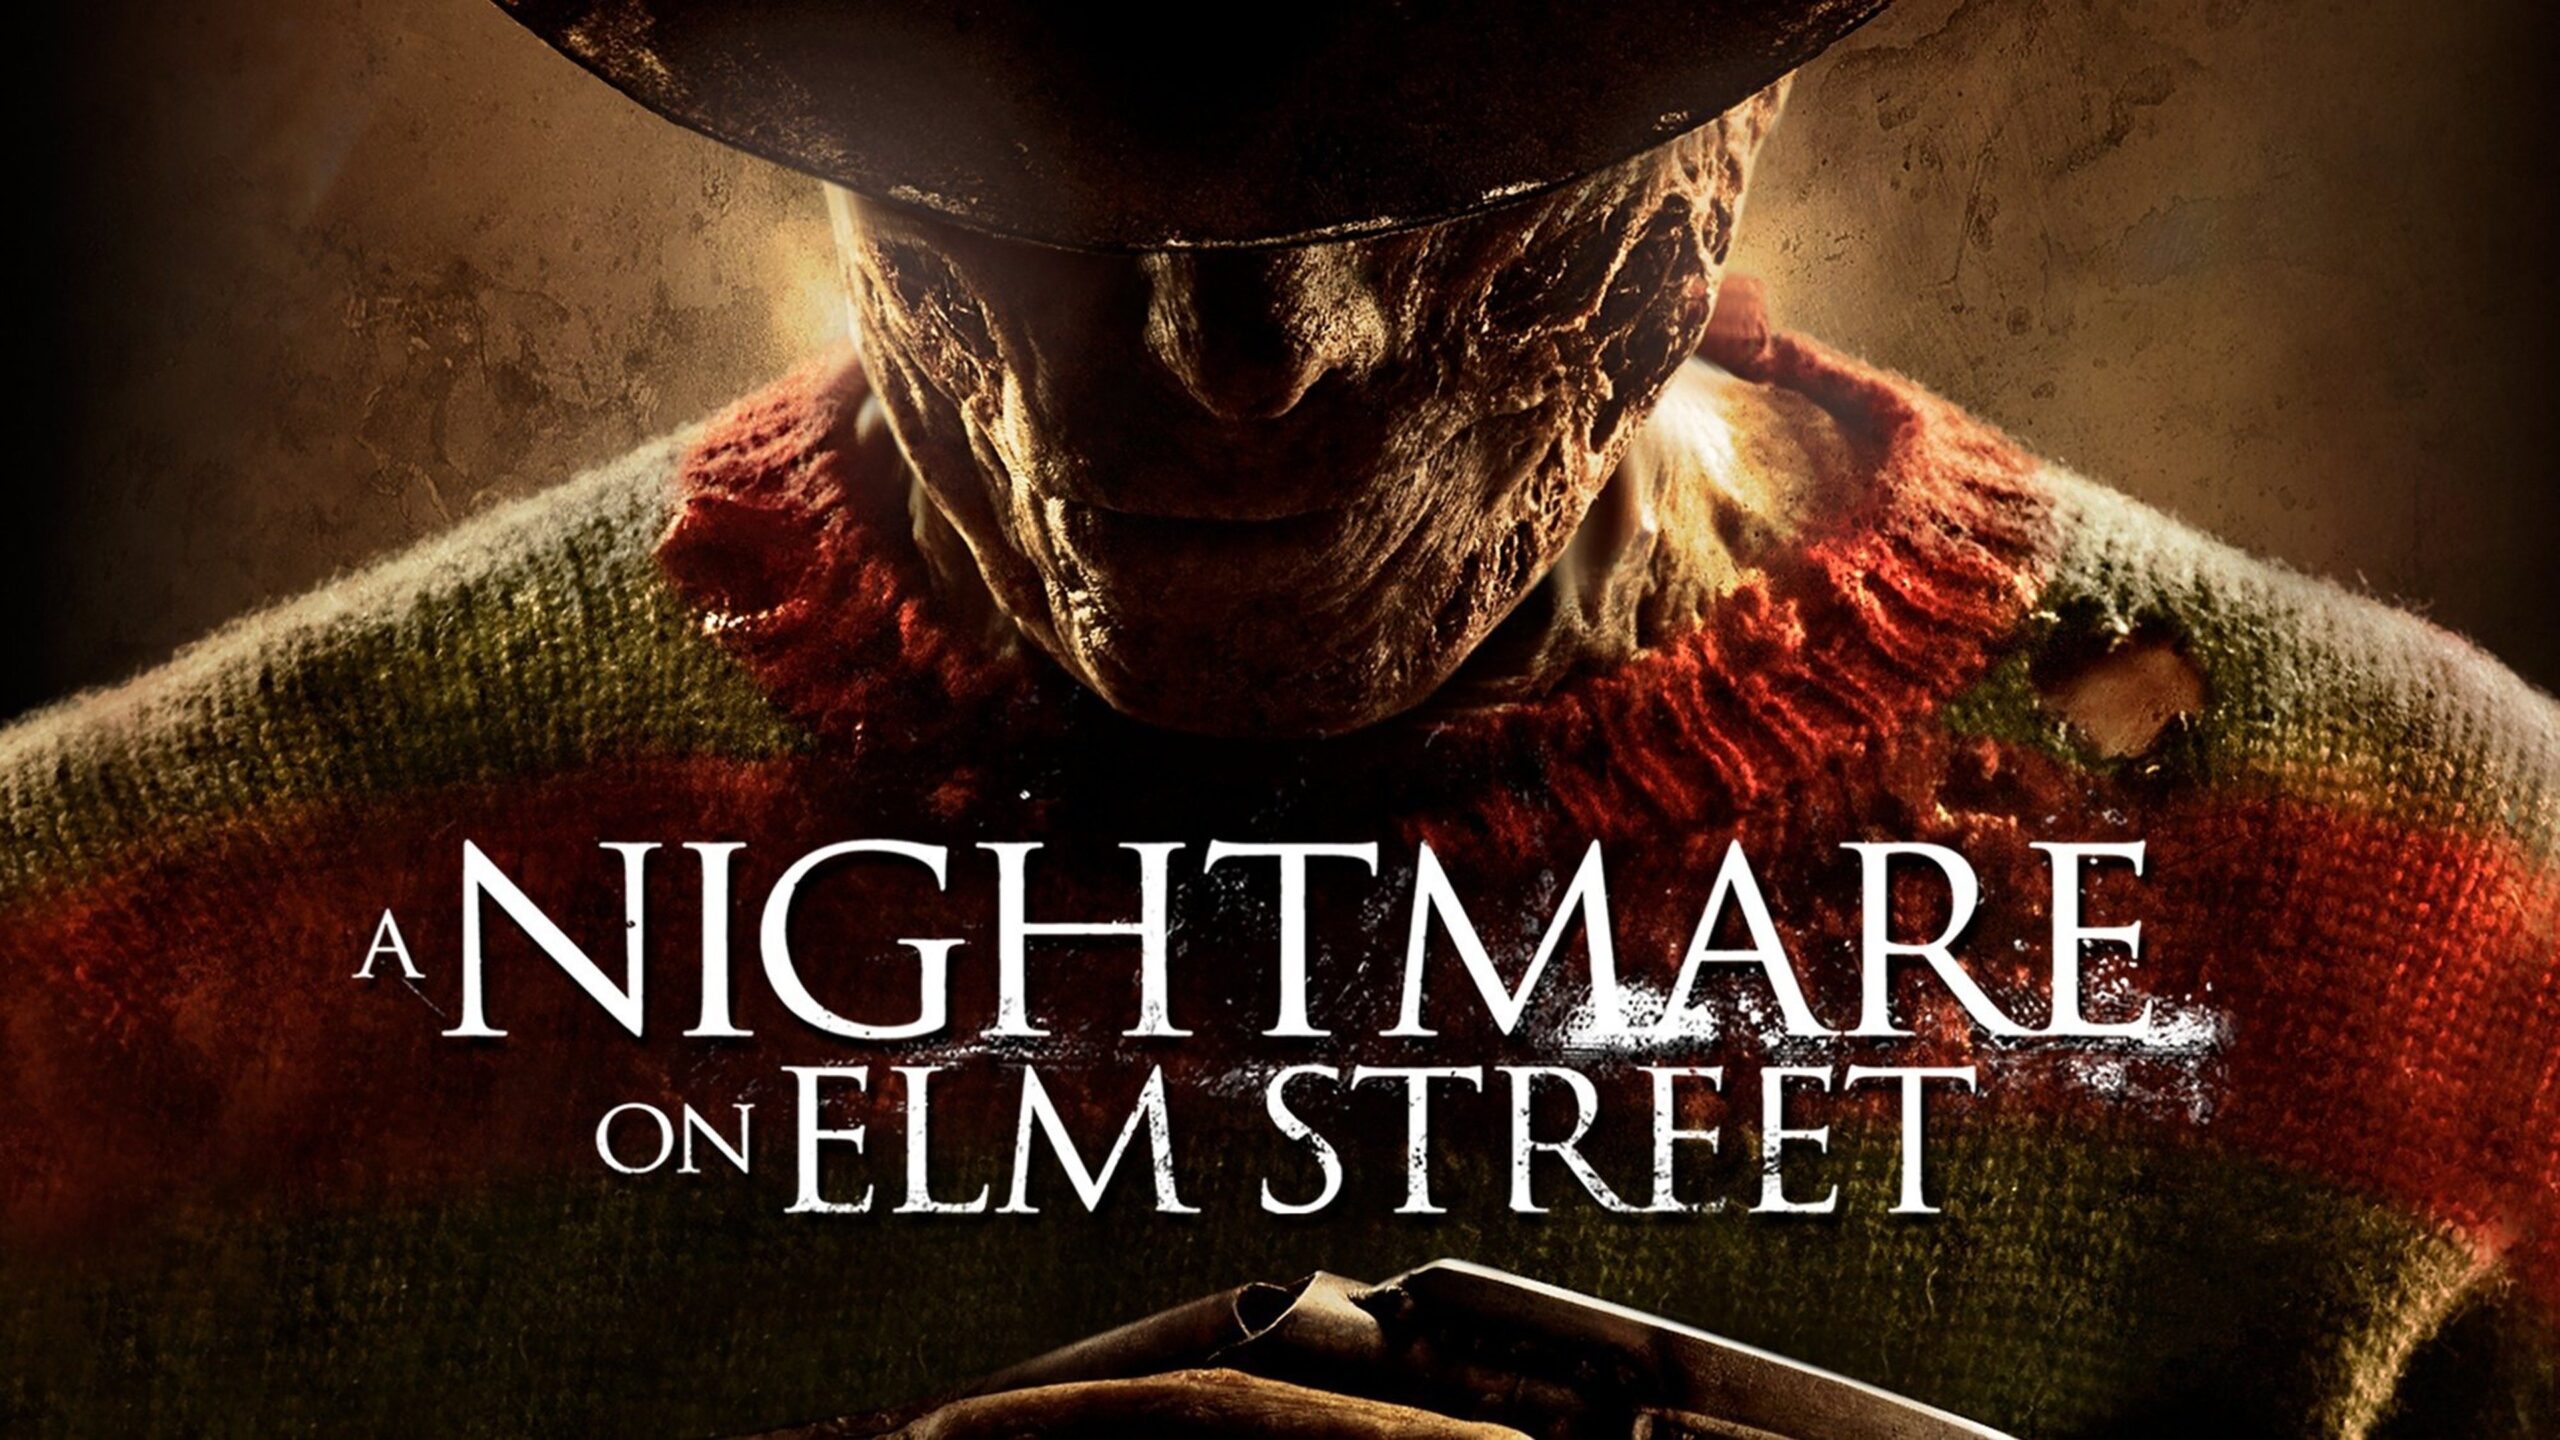 Movie the Podcast a Nightmare on Elm st